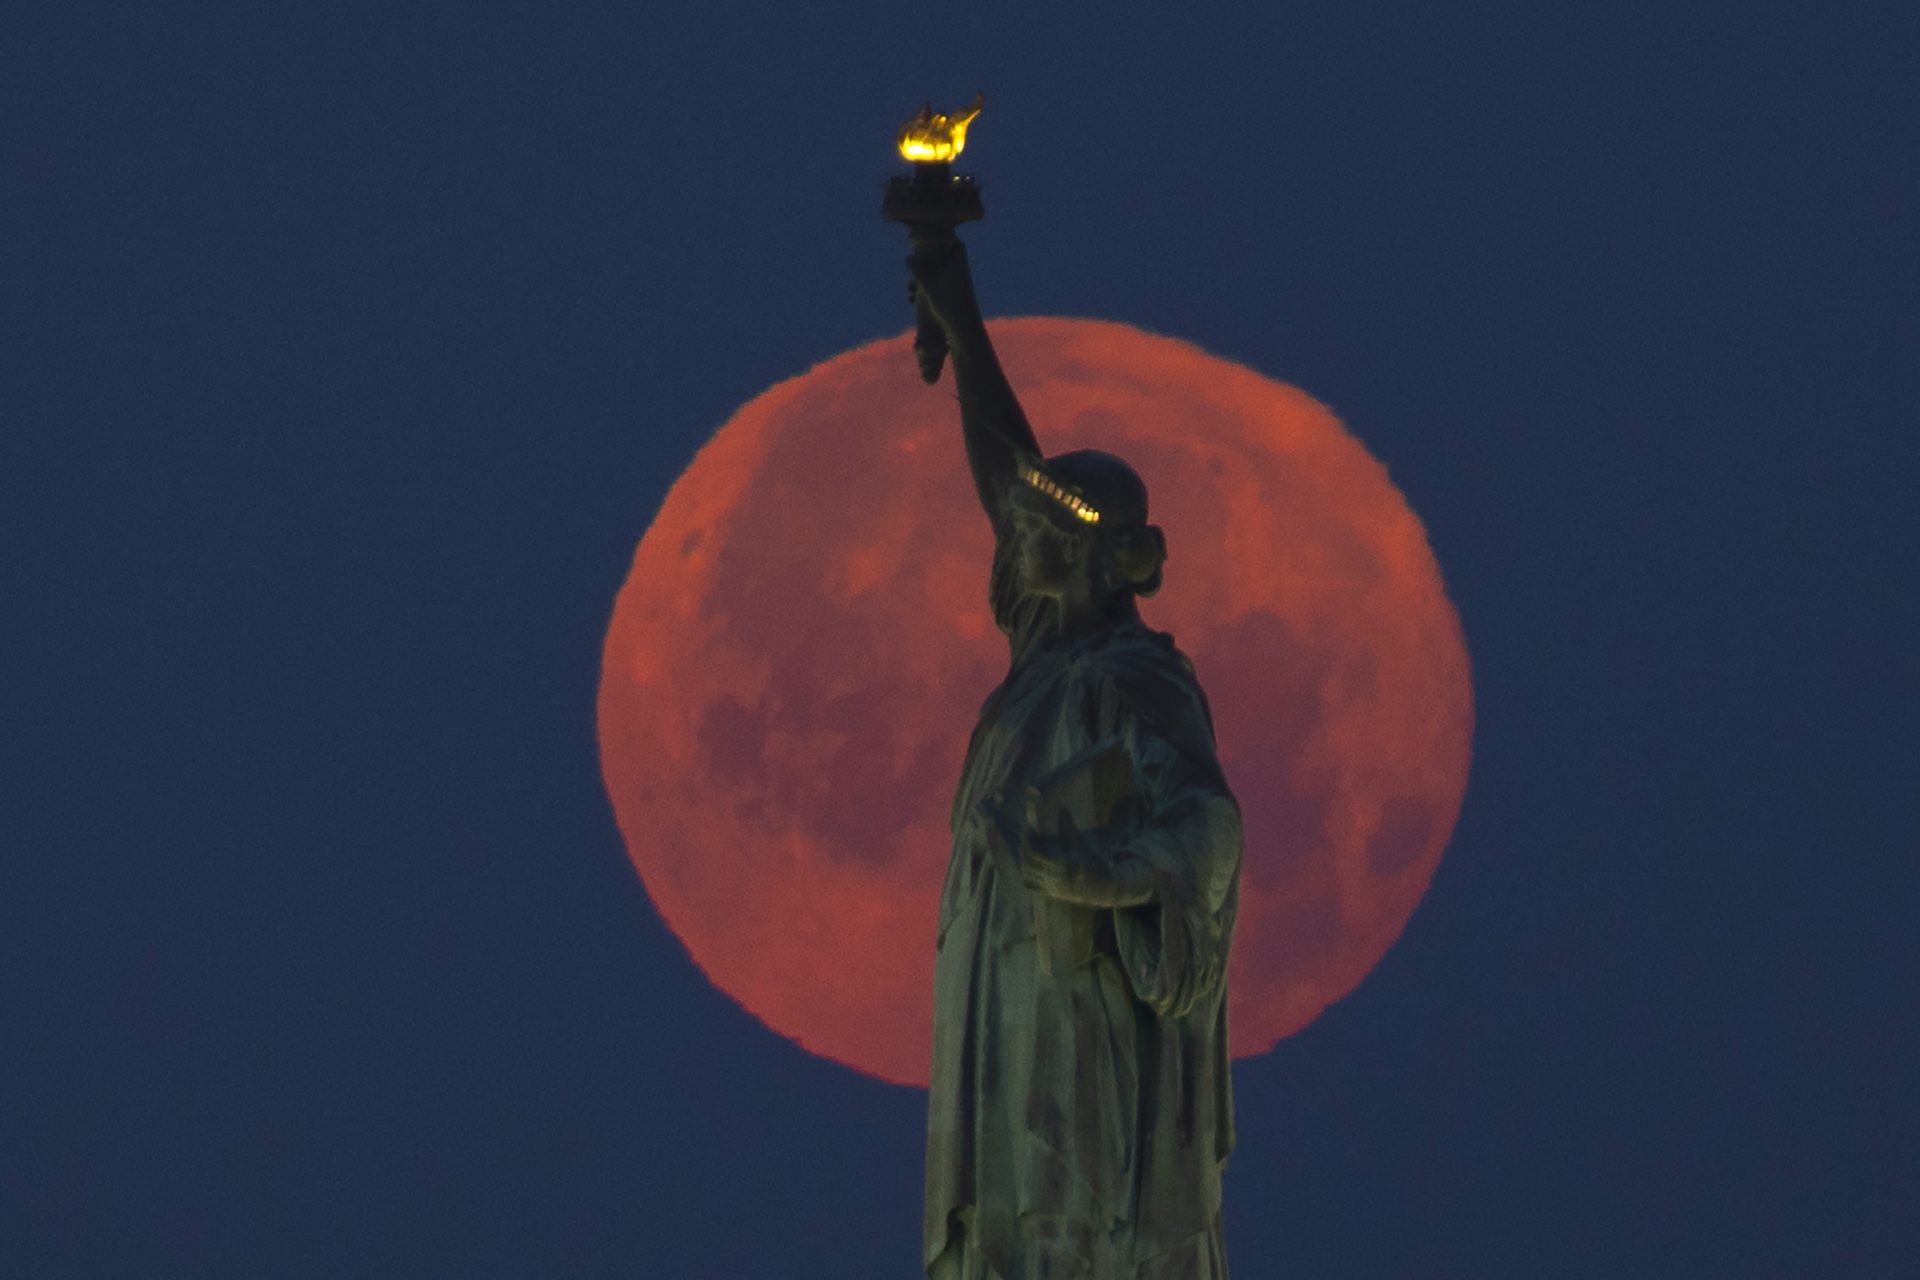 The Strawberry Moon is happening tonight. Here's what you need to know.